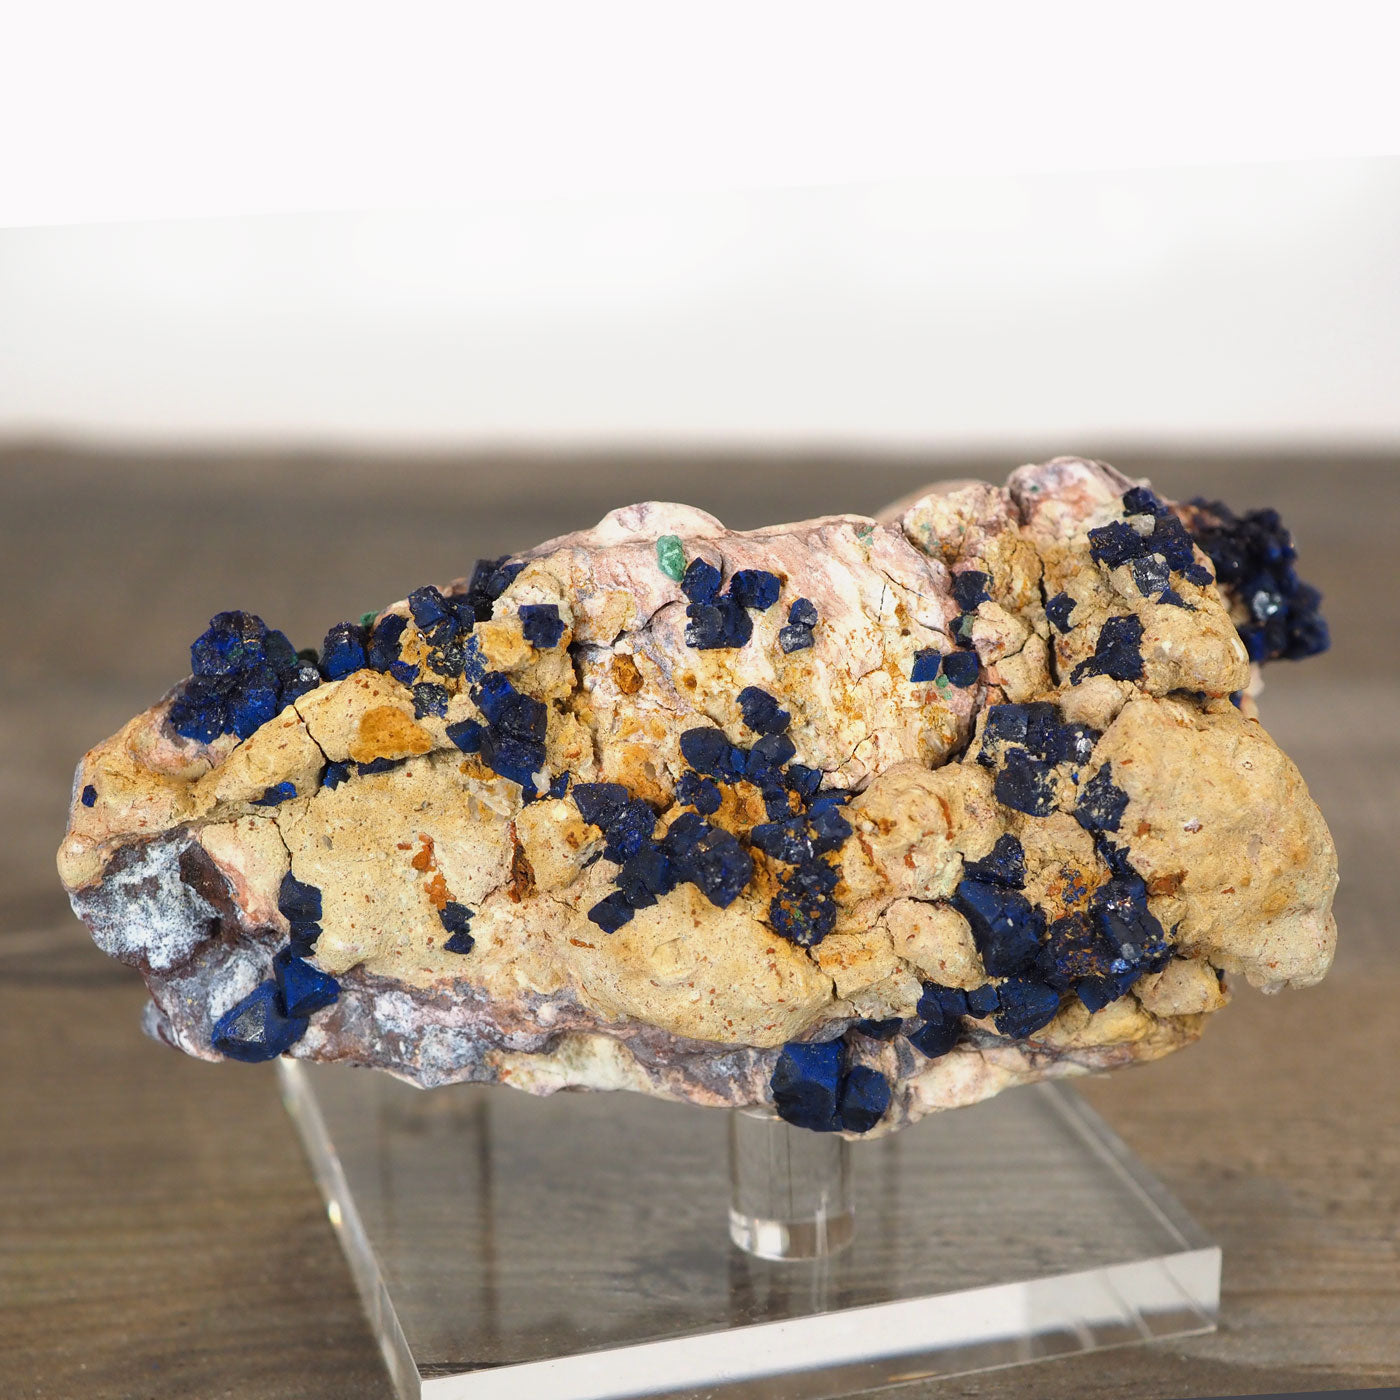 Sparkling 4" long Azurite Clusters in Matrix